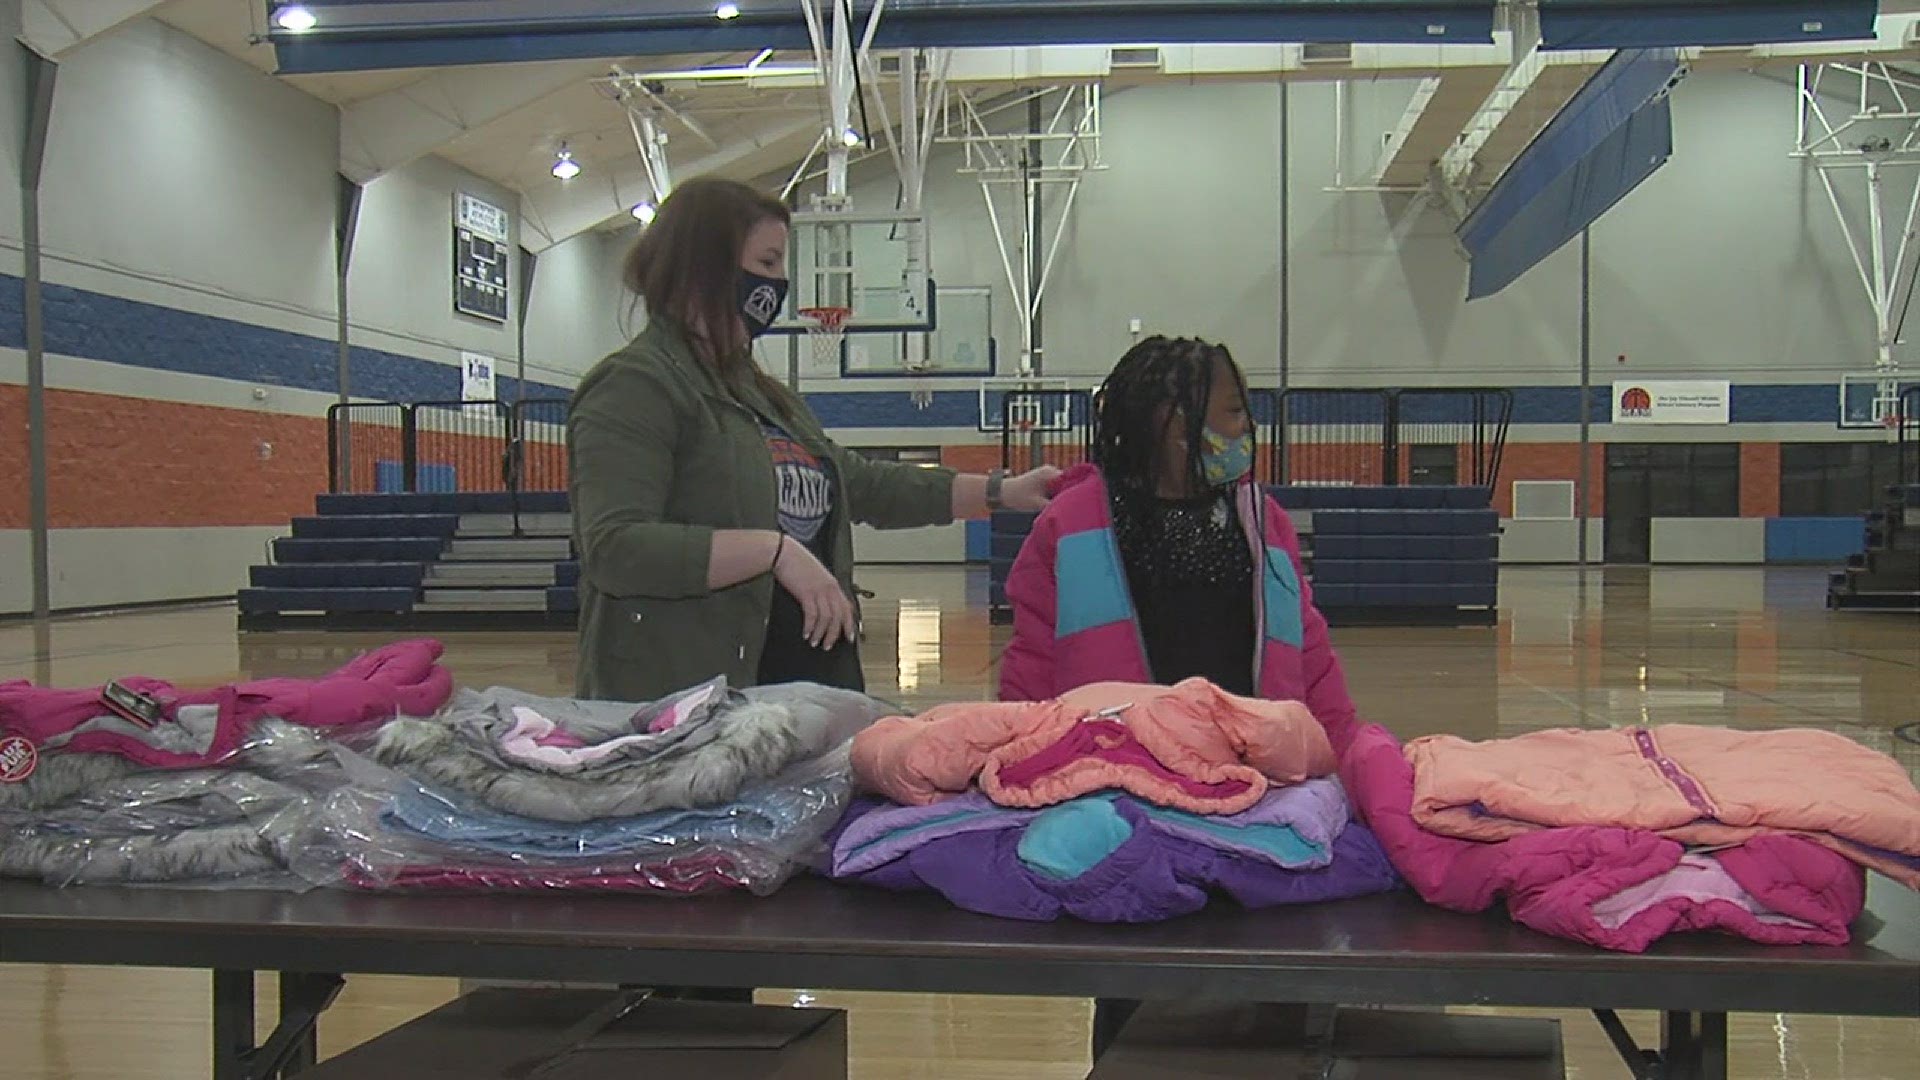 The coats were given to children within Memphis Athletic Ministries by FedEx's "Operation Warm."